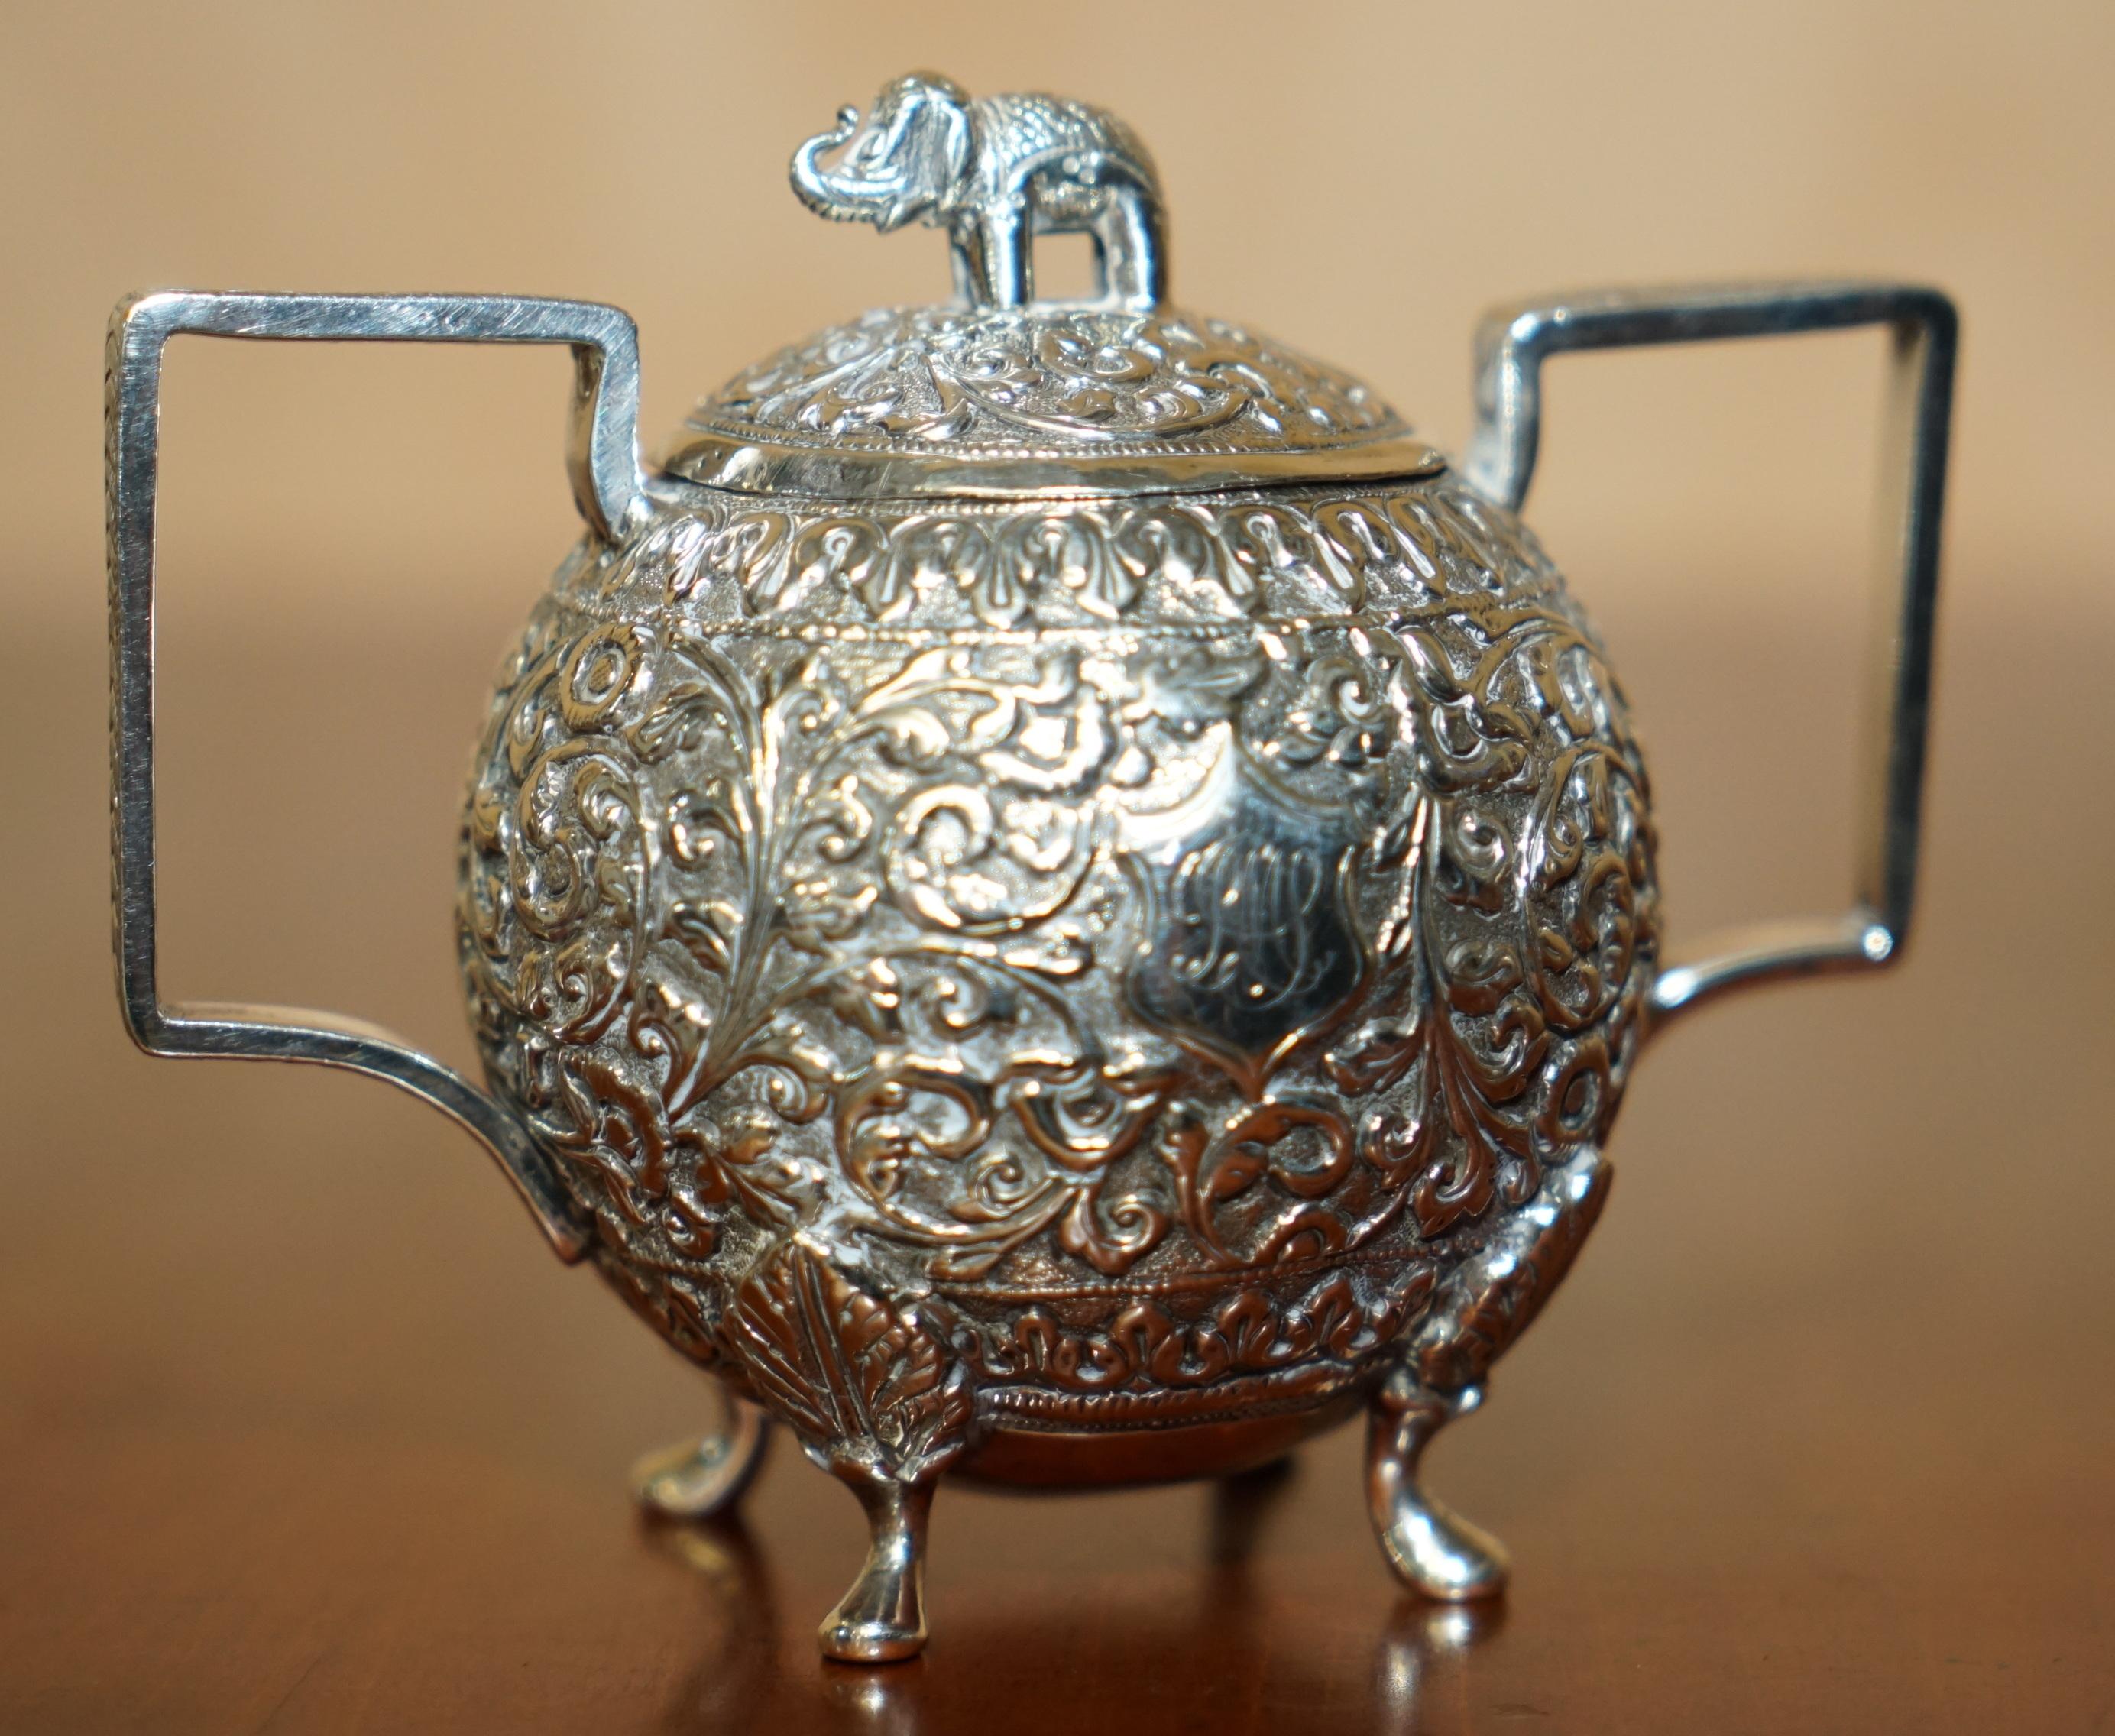 ANTIQUE INDIAN ELEPHANT COLONIAL SOLiD SILVER TEA SERVICE OOMERSI MAWJI & SONS For Sale 5